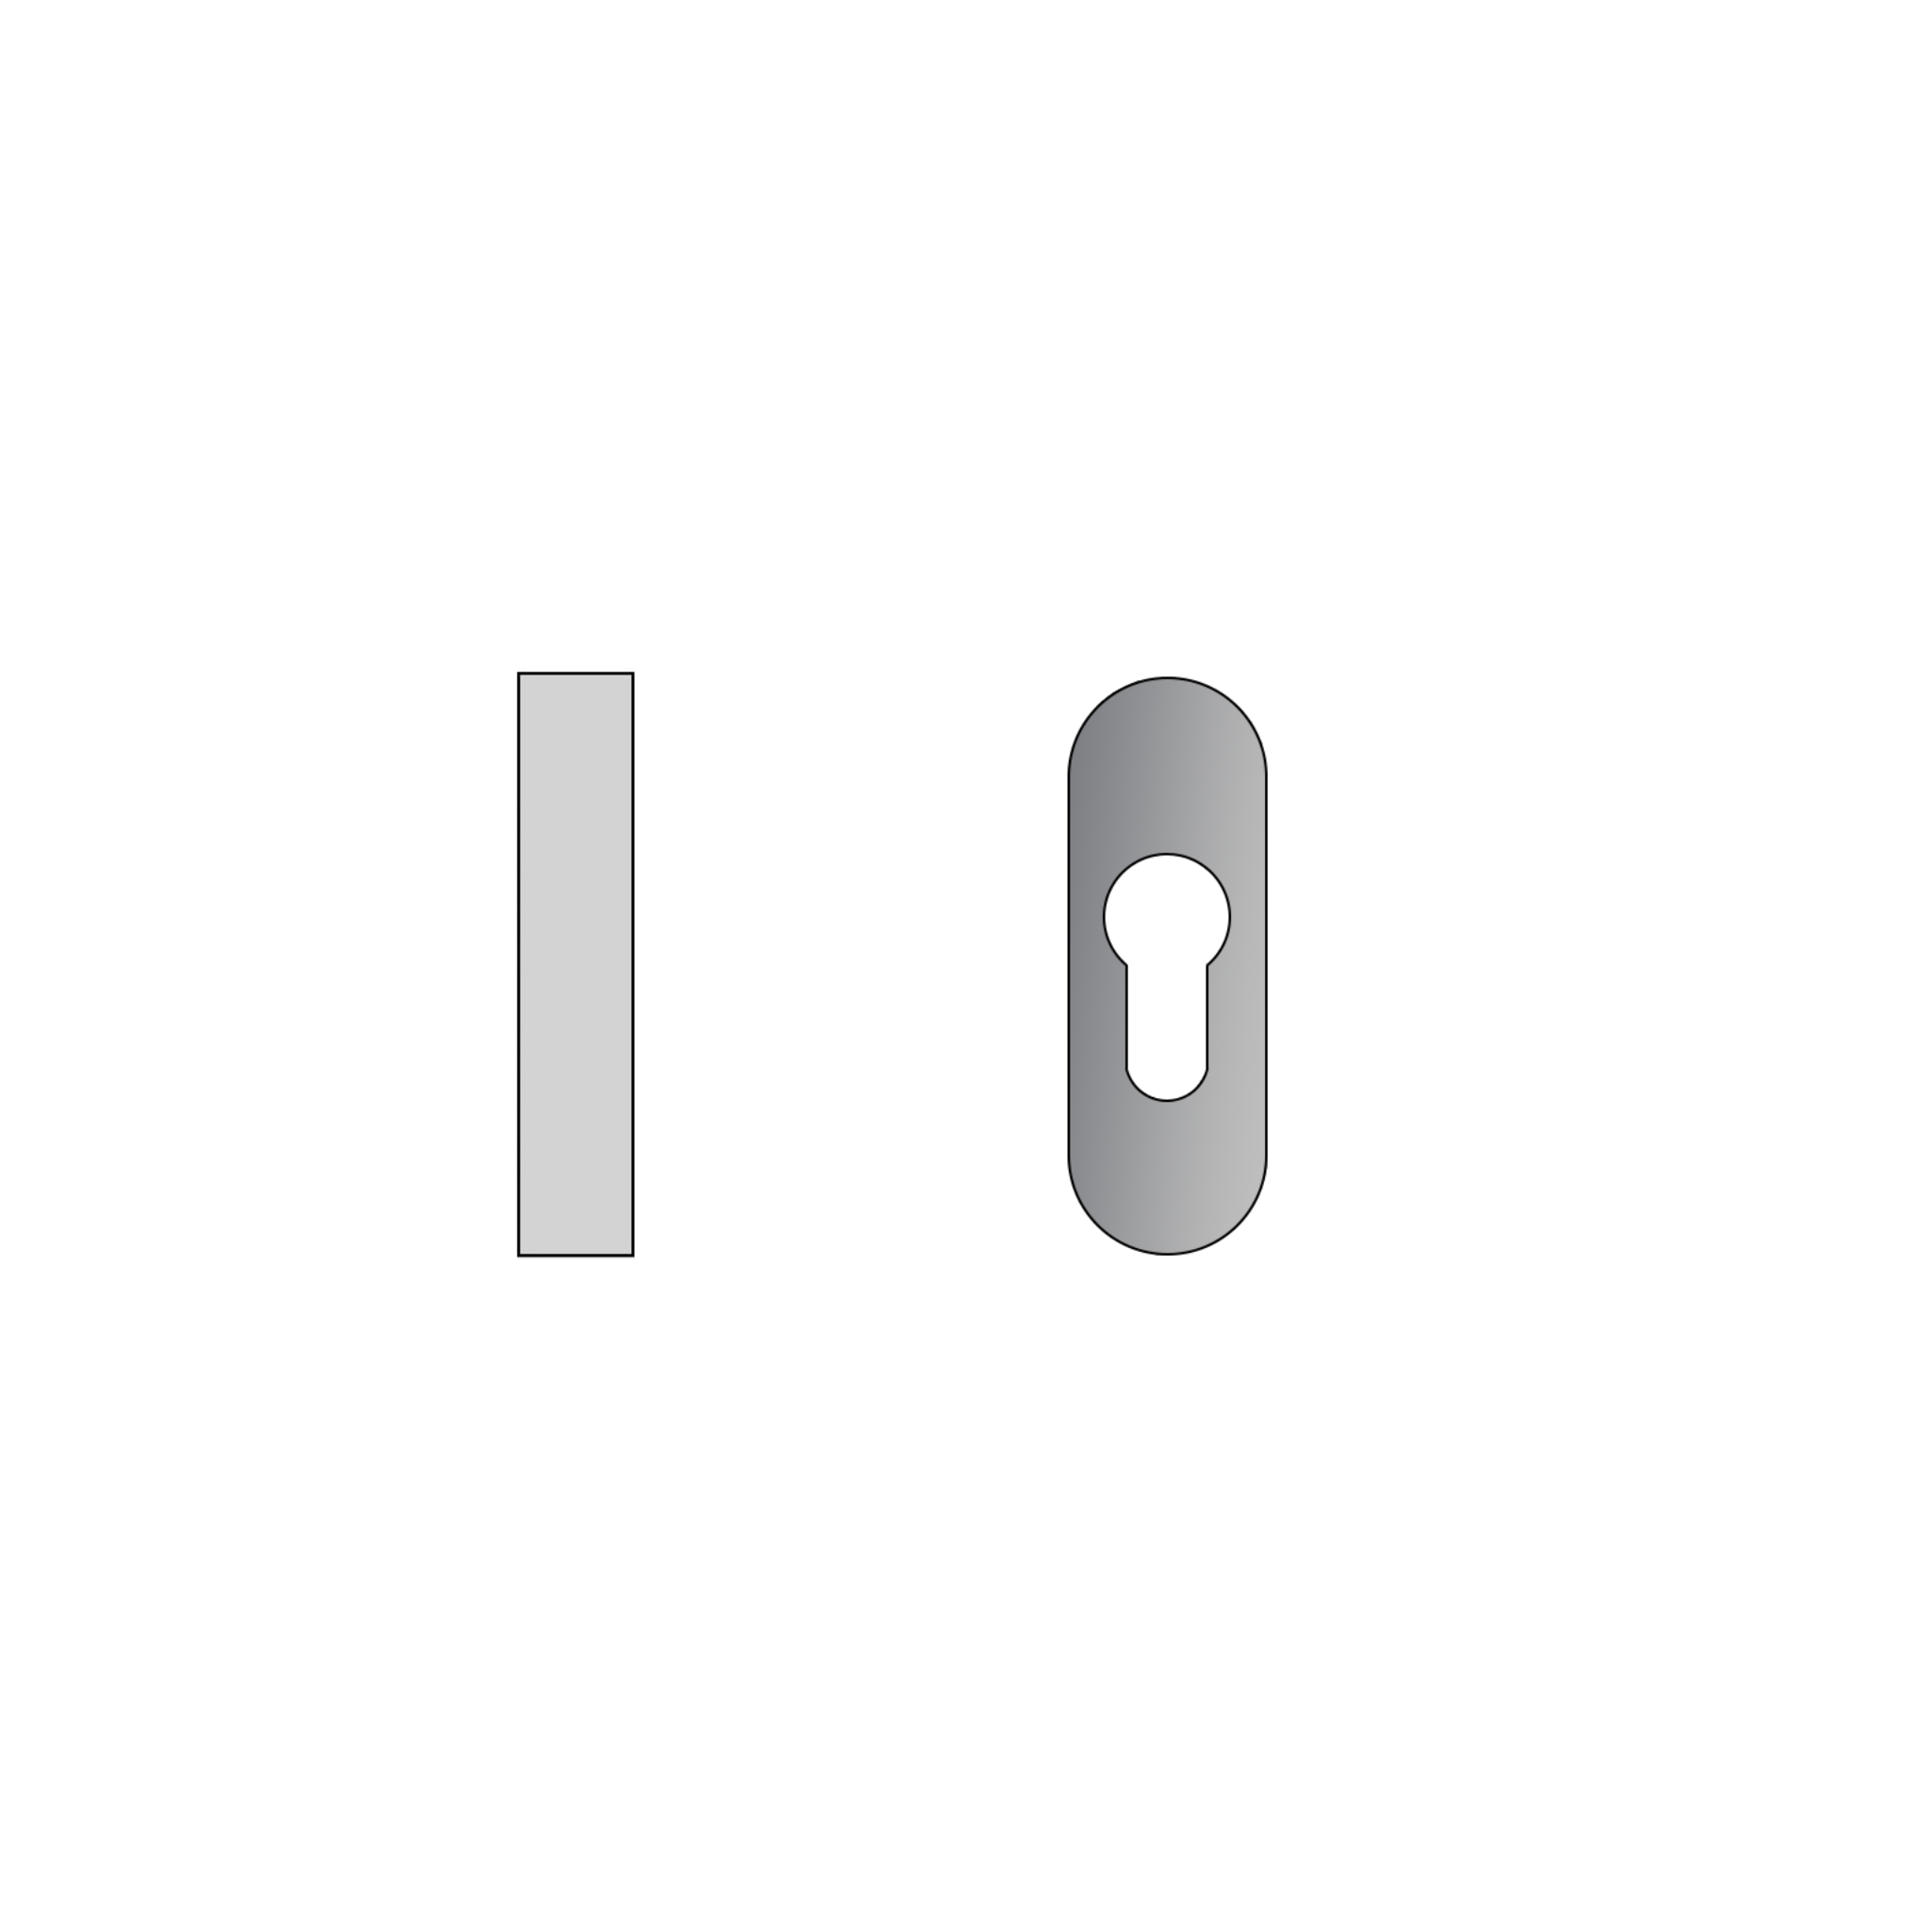 QS4405, Cylinder Escutcheon, Oval Rose, 64mm (h) x 30mm (w) x 8mm (t), Stainless Steel, QS